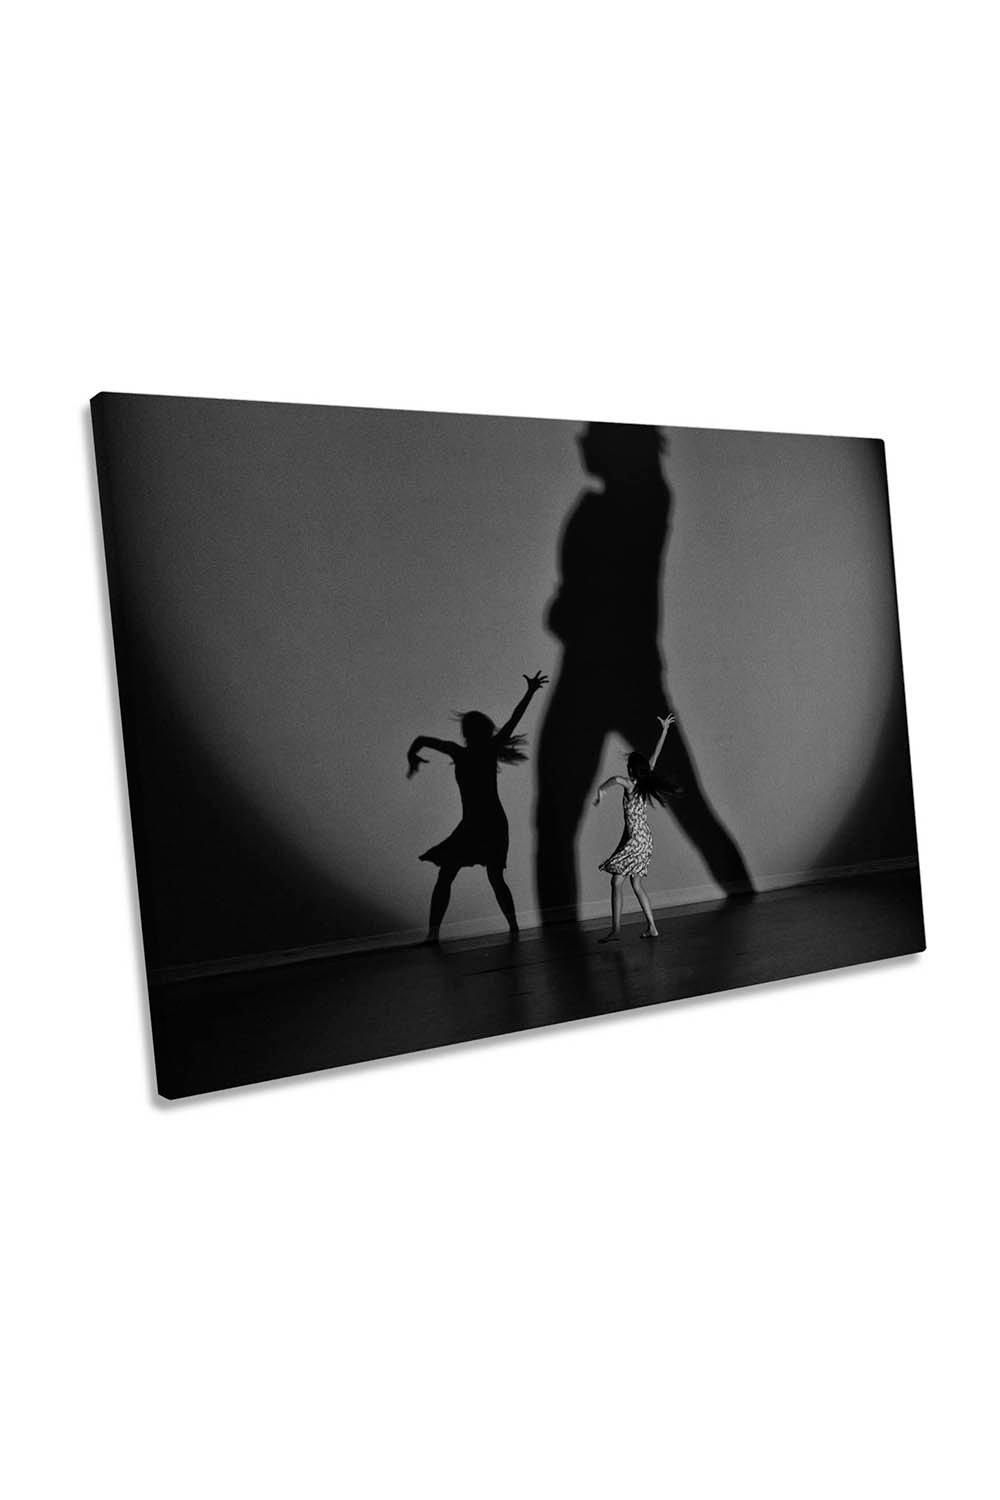 The Dancers Performance Shadows Canvas Wall Art Picture Print